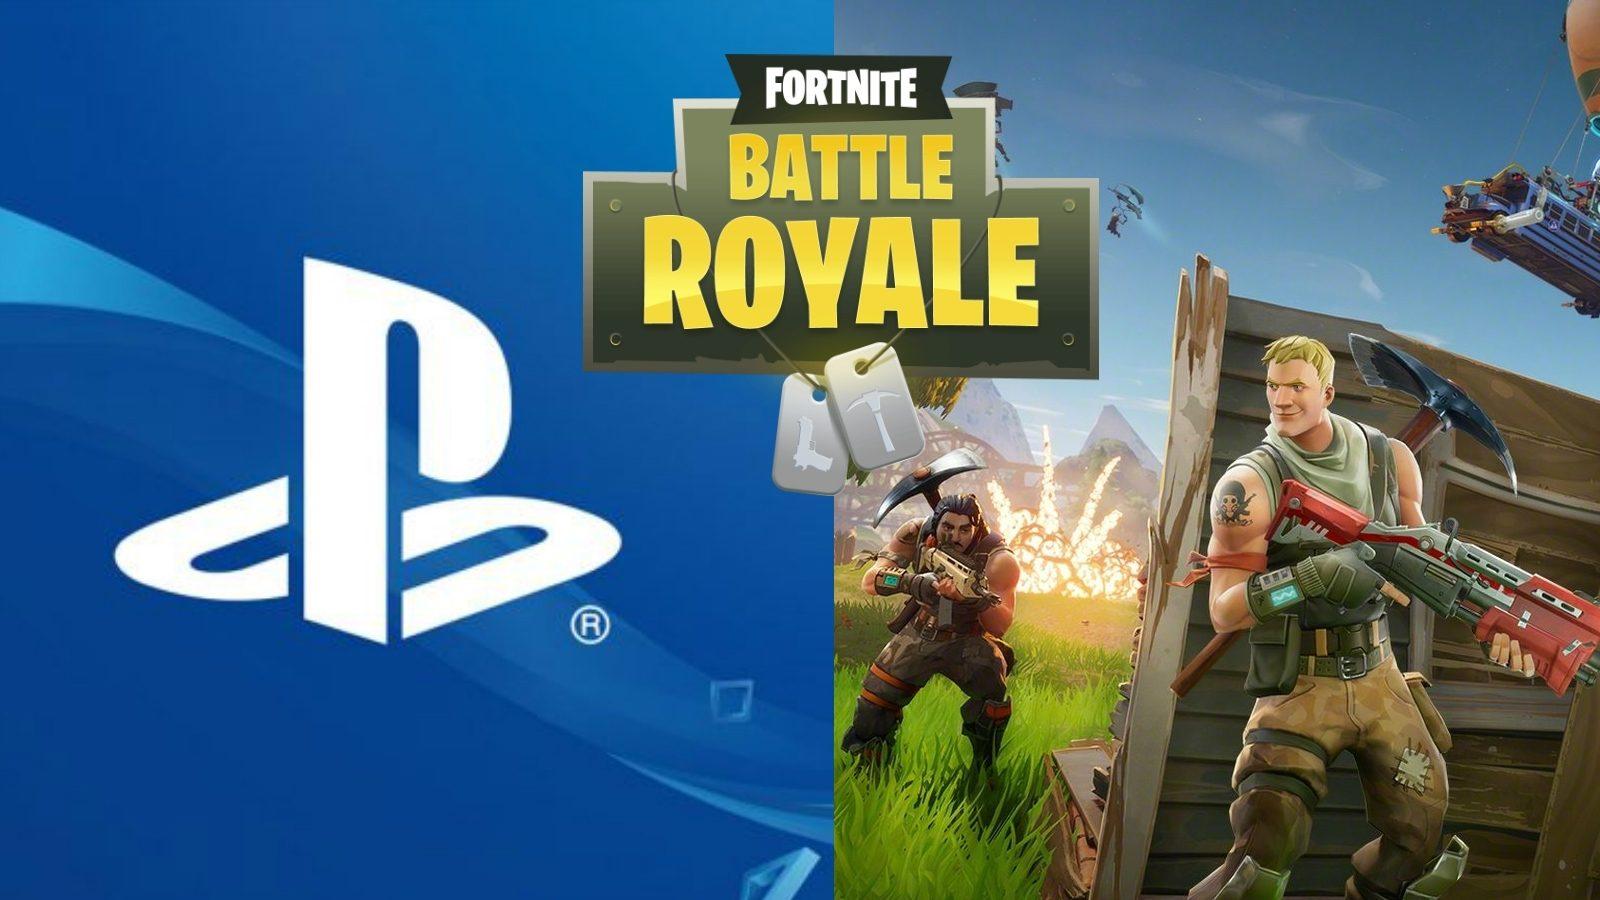 Sony enables Fortnite cross-play between PS4, Xbox One and Nintendo Switch